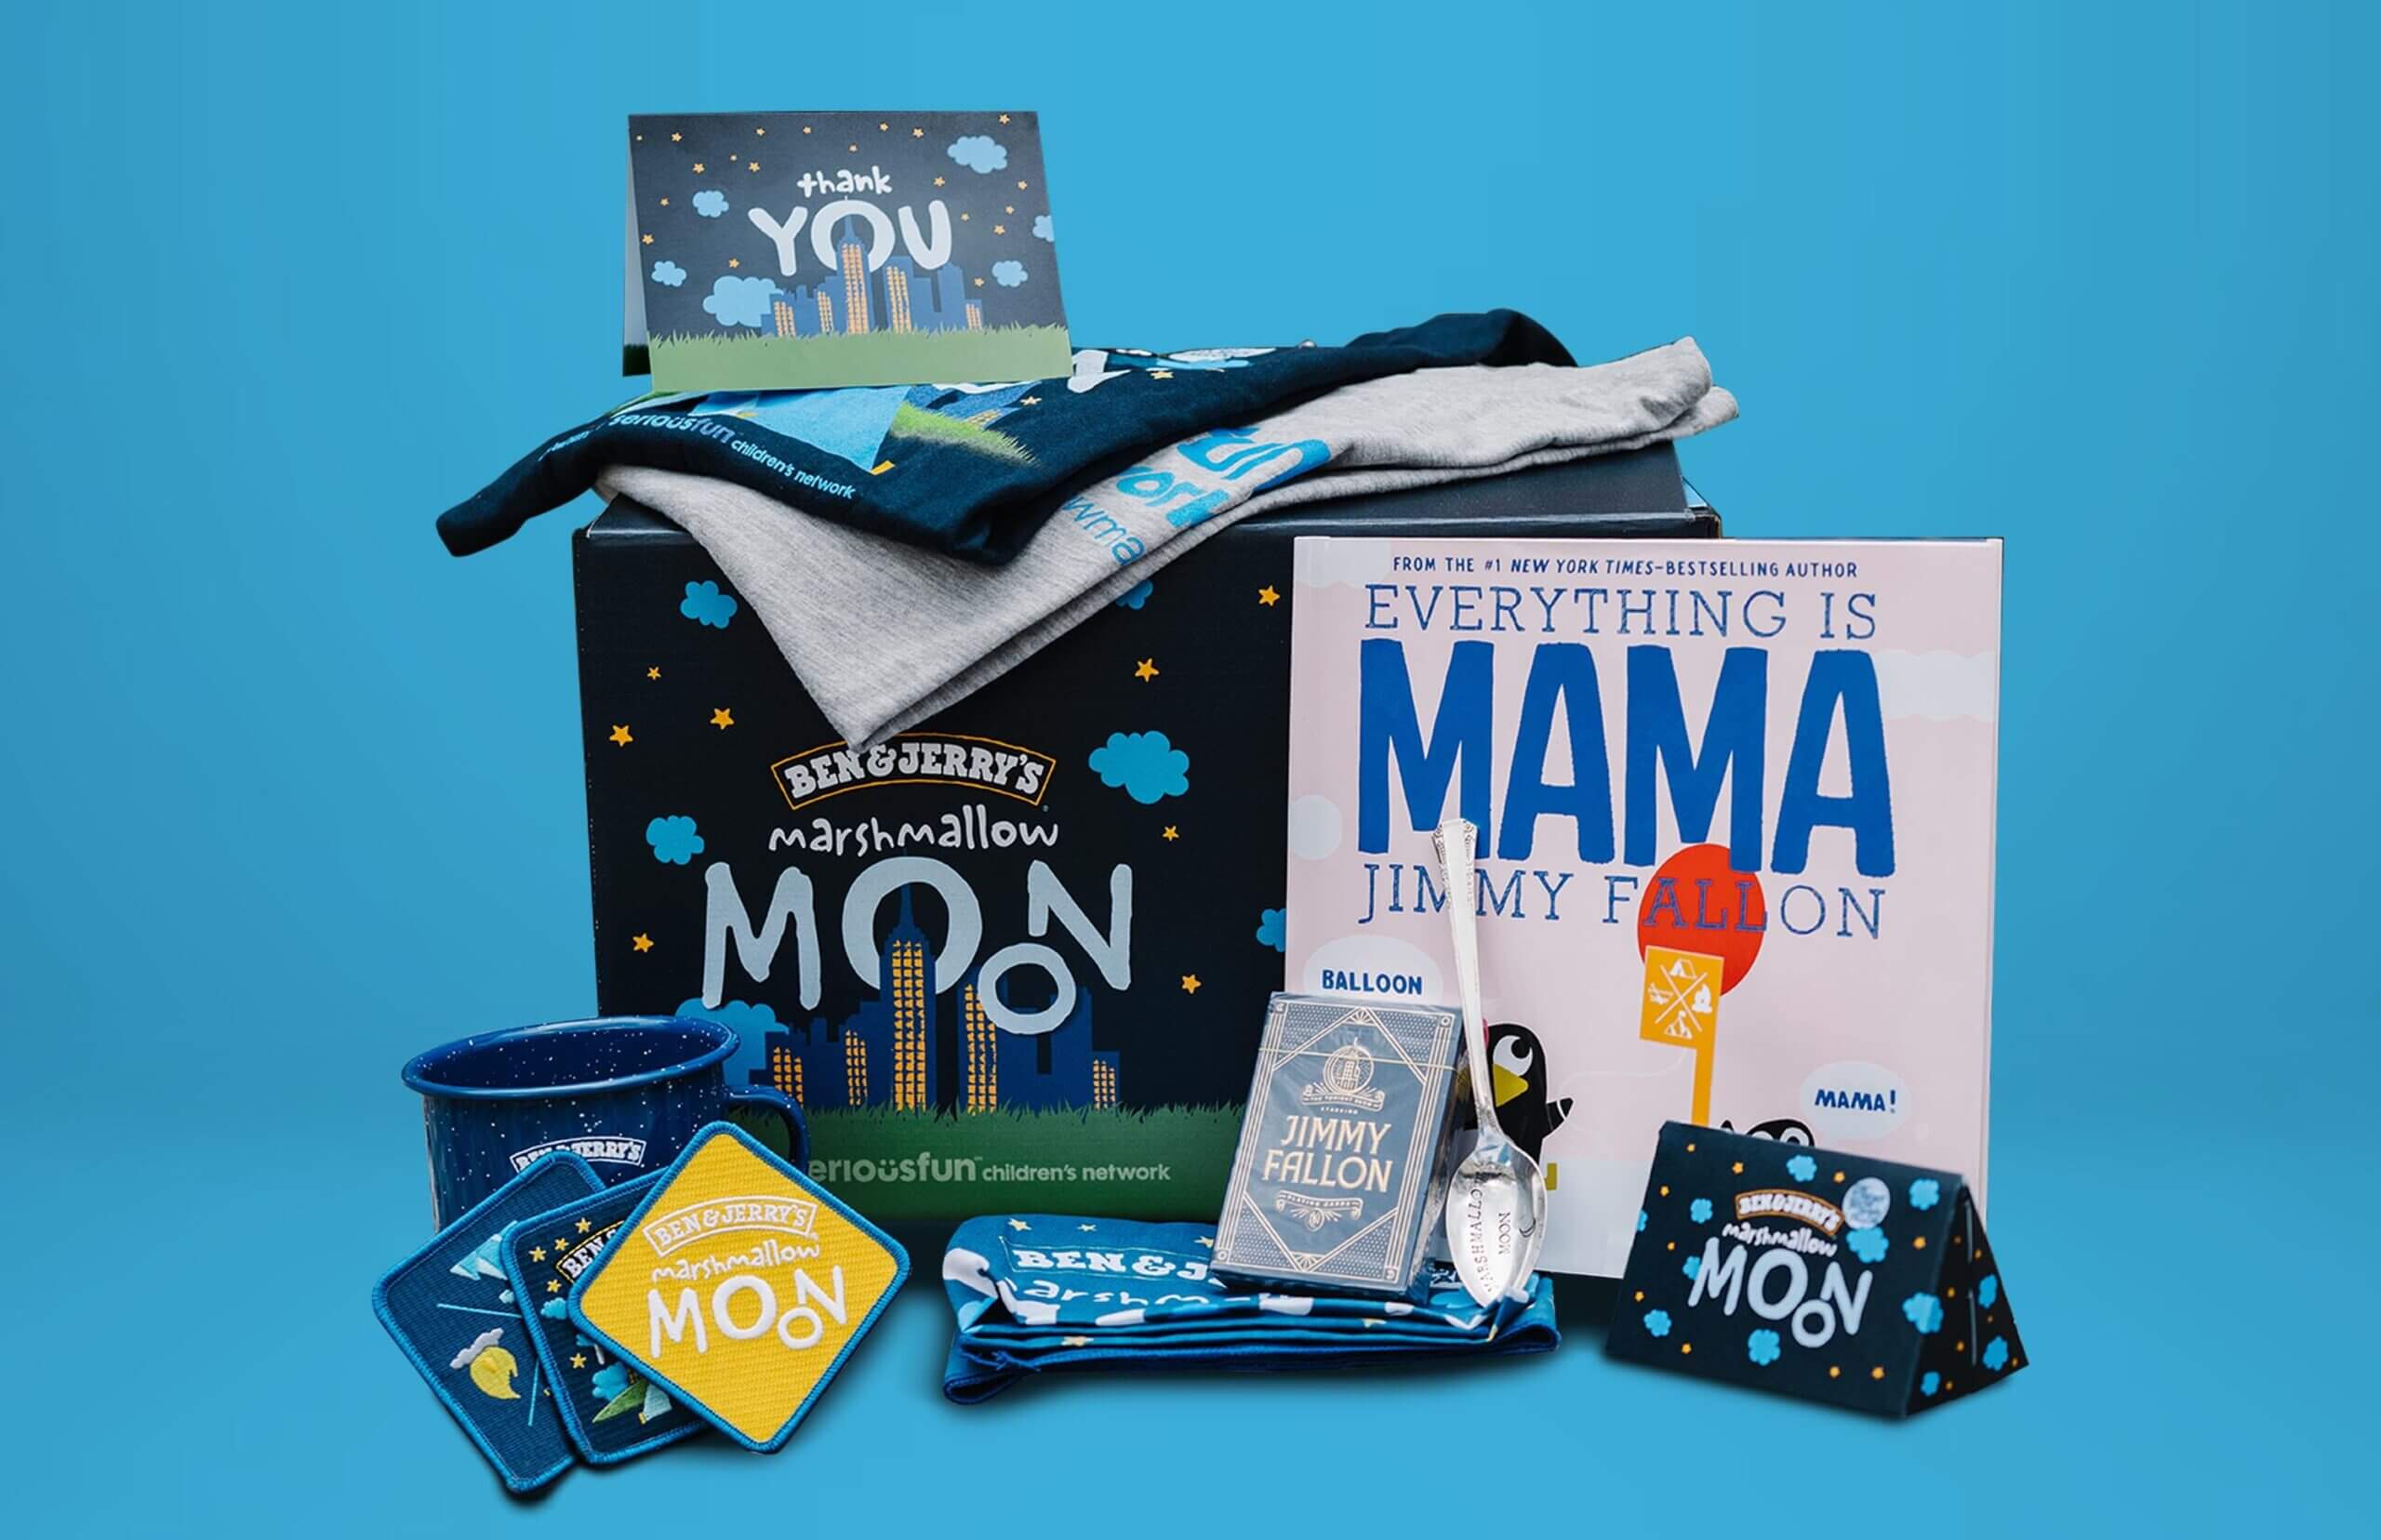 A variety of Ben & Jerry's merchandise which reads "Marshmallow Moon"